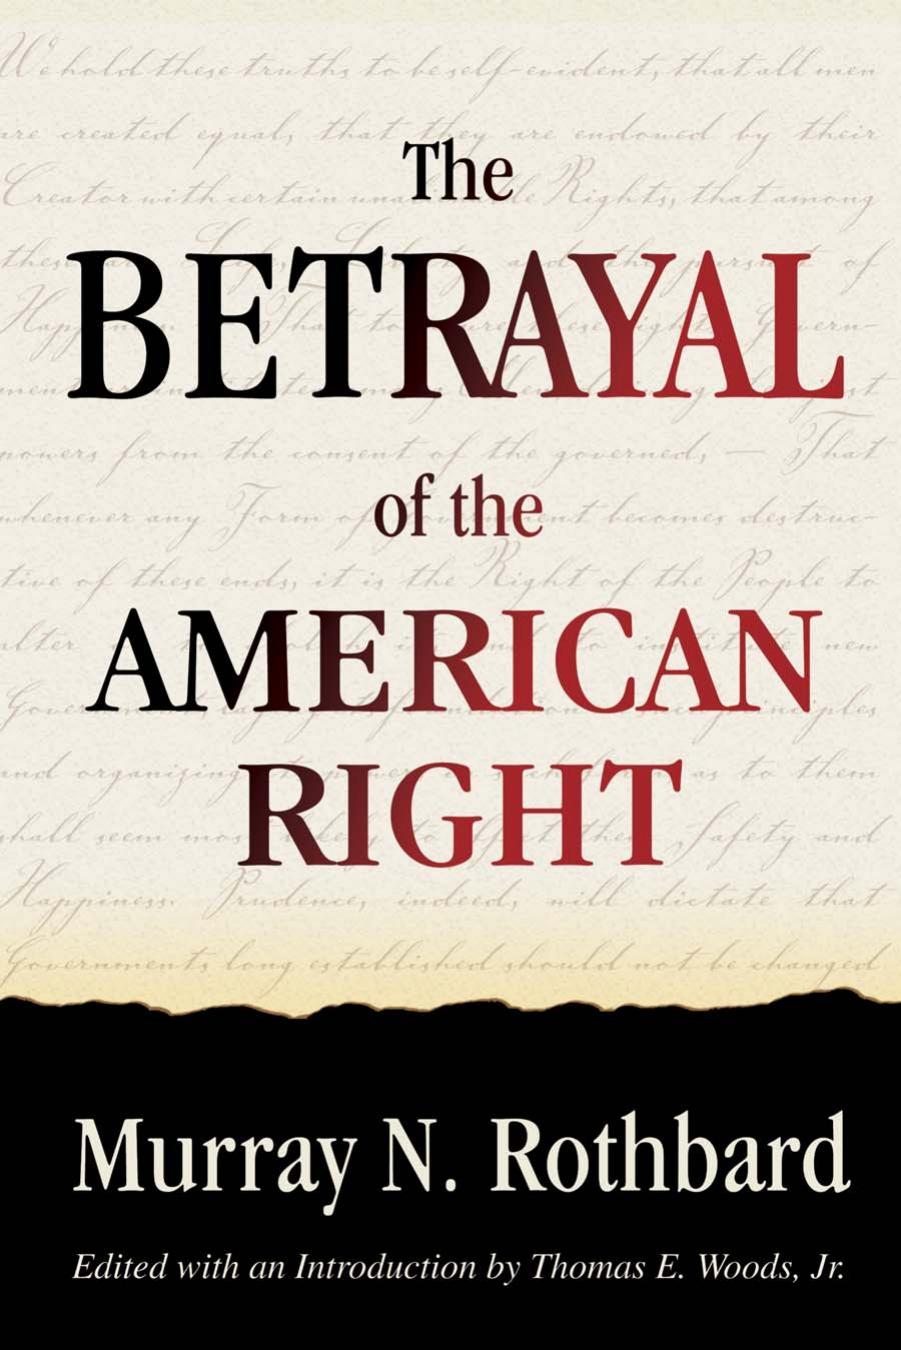 The Betrayal of the American Right